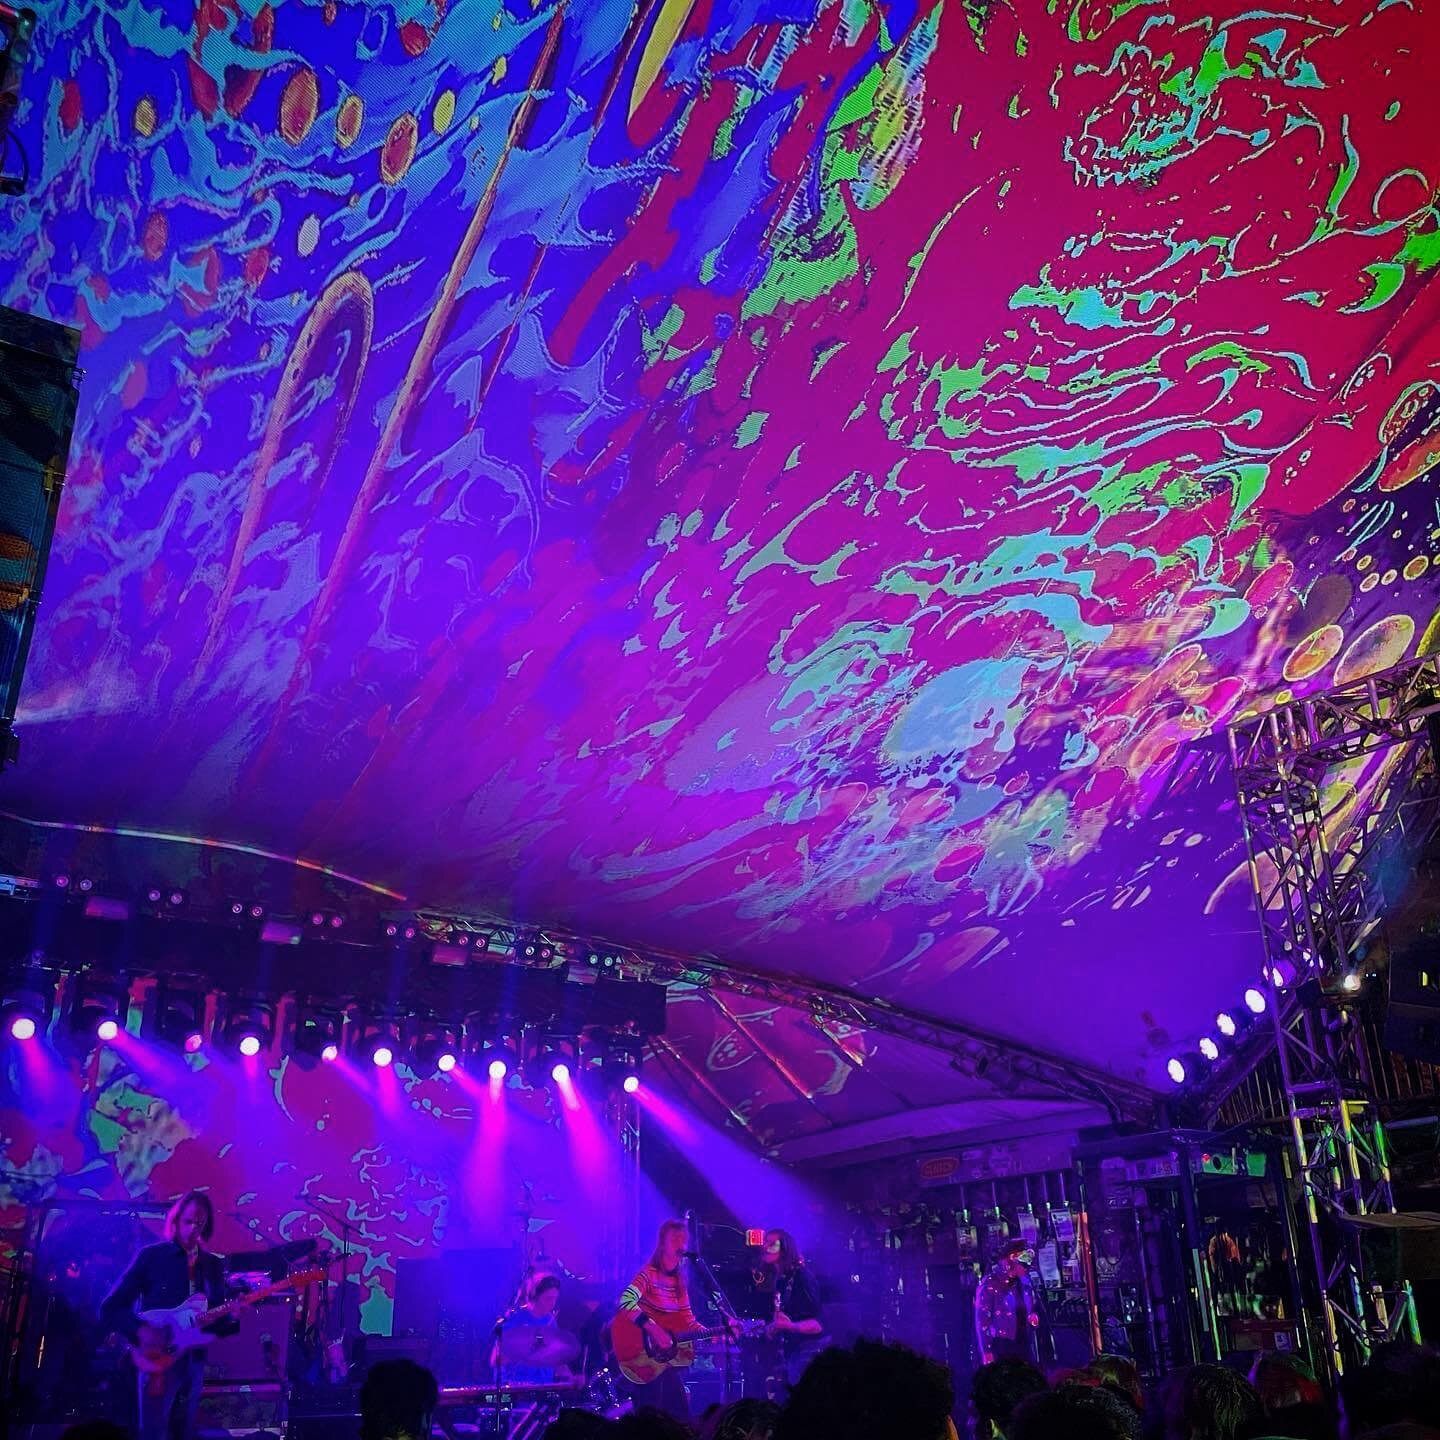 Our @christiedigital Boxer 4K30 made its way to @levitation last weekend, wrapping the @stubbsaustin backdrop in immersive visuals. 
Big thanks to Zach at @ilios_productions for facilitating the installation. 
.
#projection #projectionmapping #3dart 